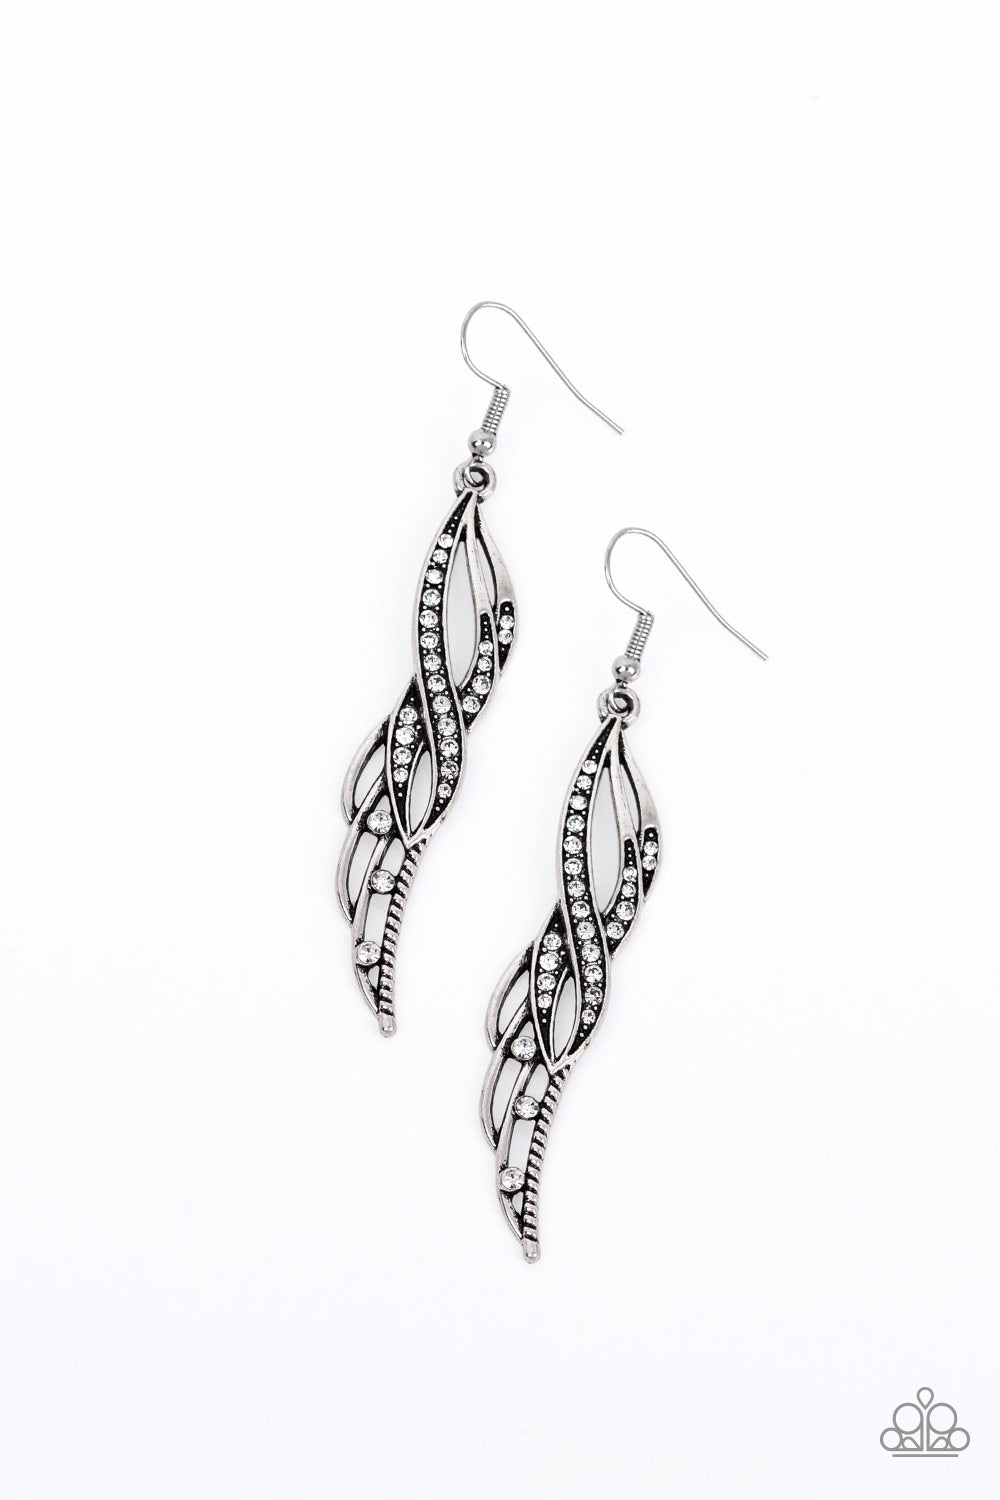 Paparazzi earring - Let Down Your Wings - White